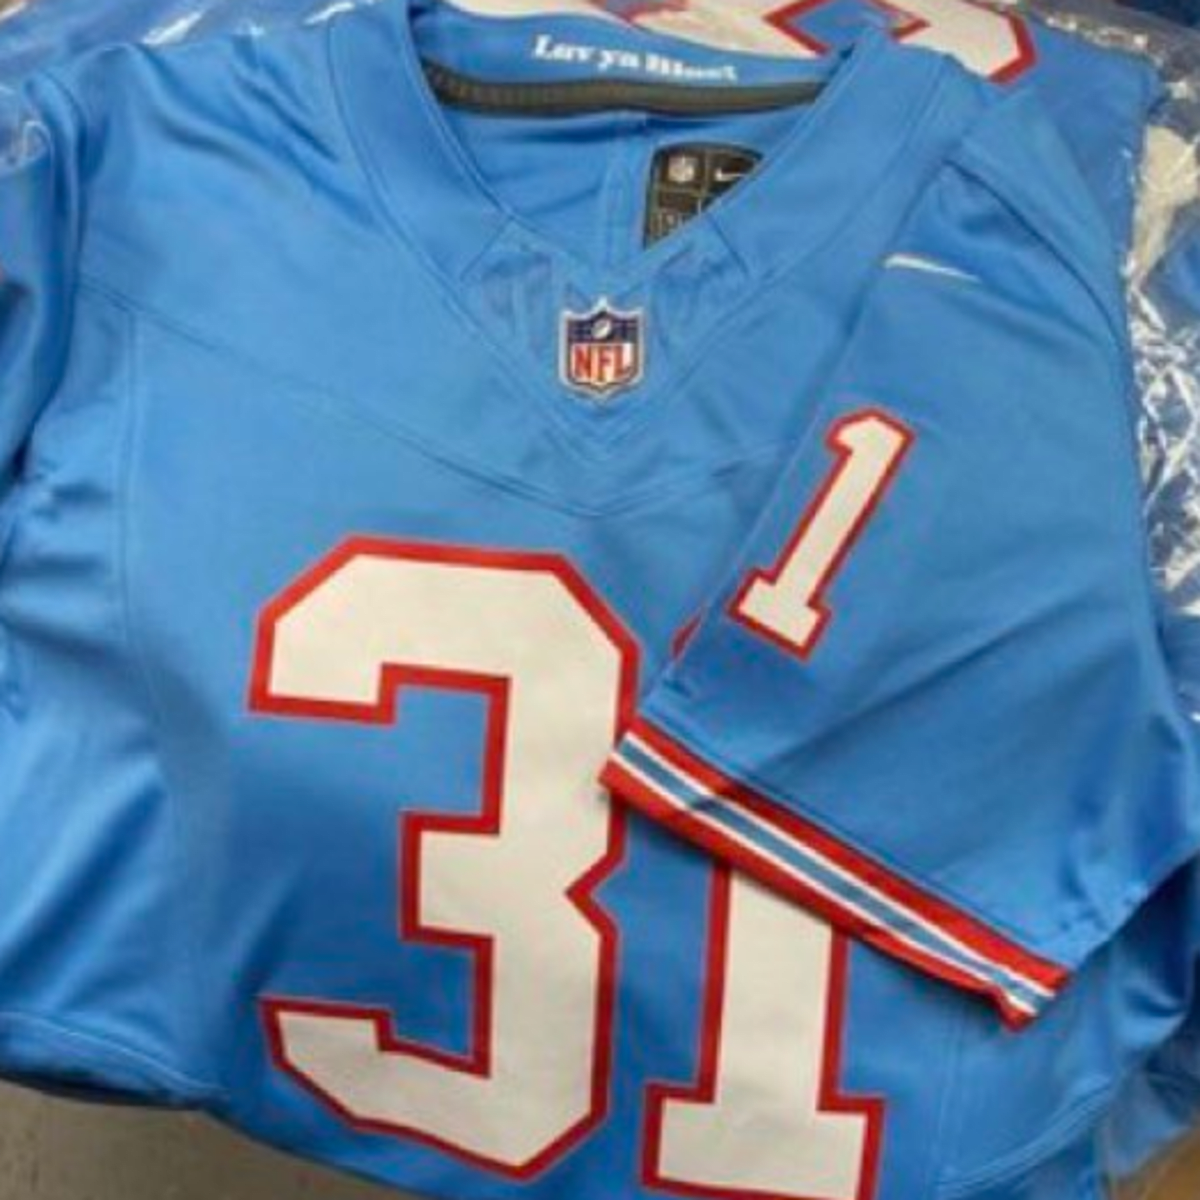 Tennessee Titans have unveiled their 'Houston Oilers' throwback